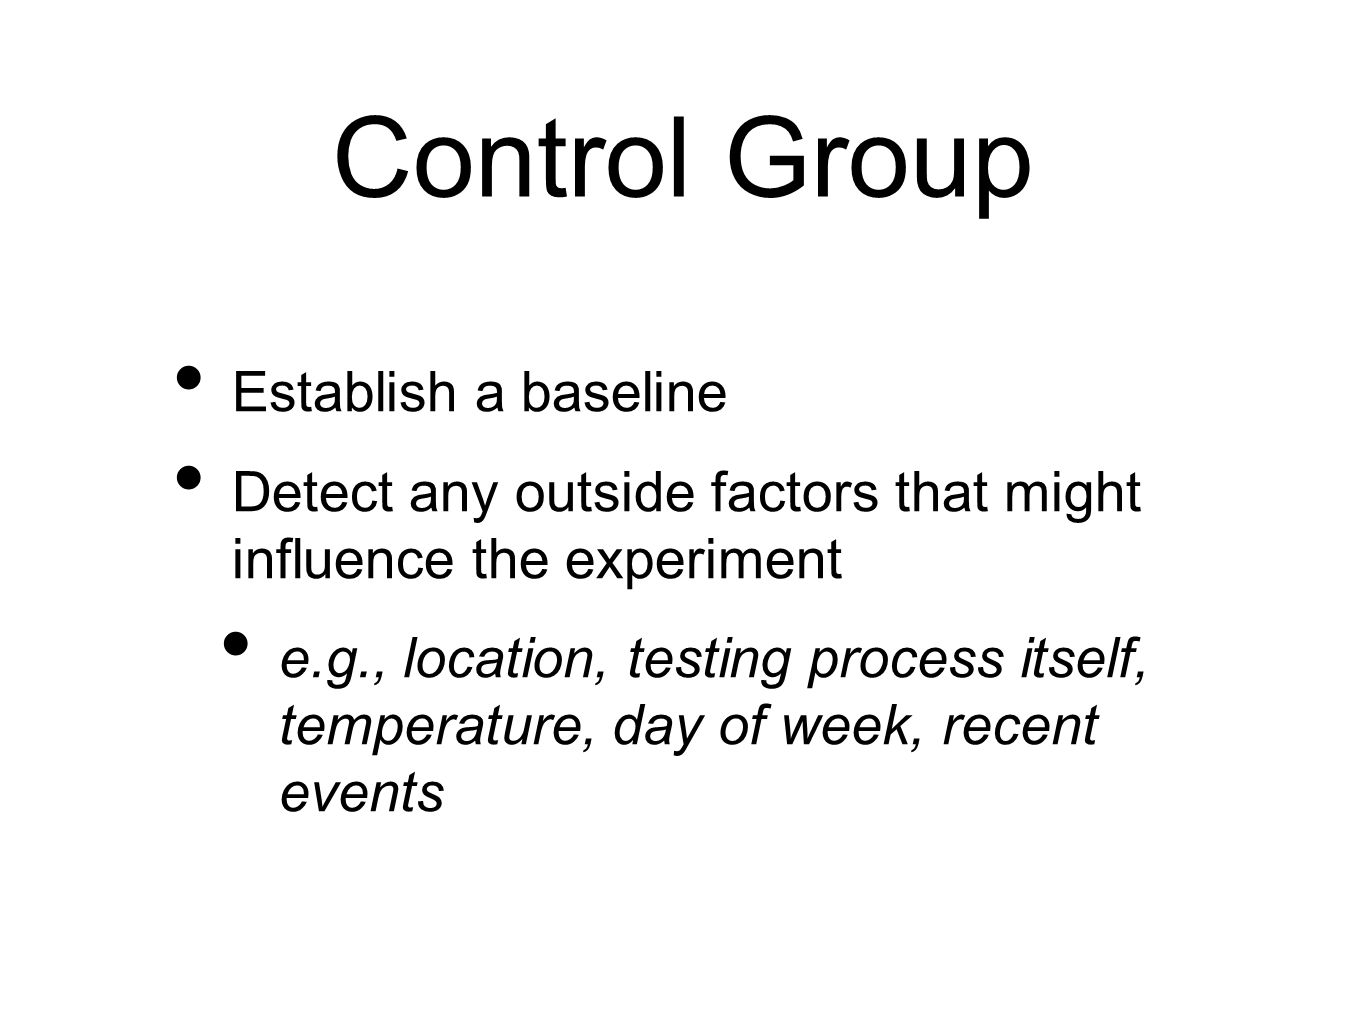 Control Group Establish a baseline Detect any outside factors that might influence the experiment e.g., location, testing process itself, temperature, day of week, recent events